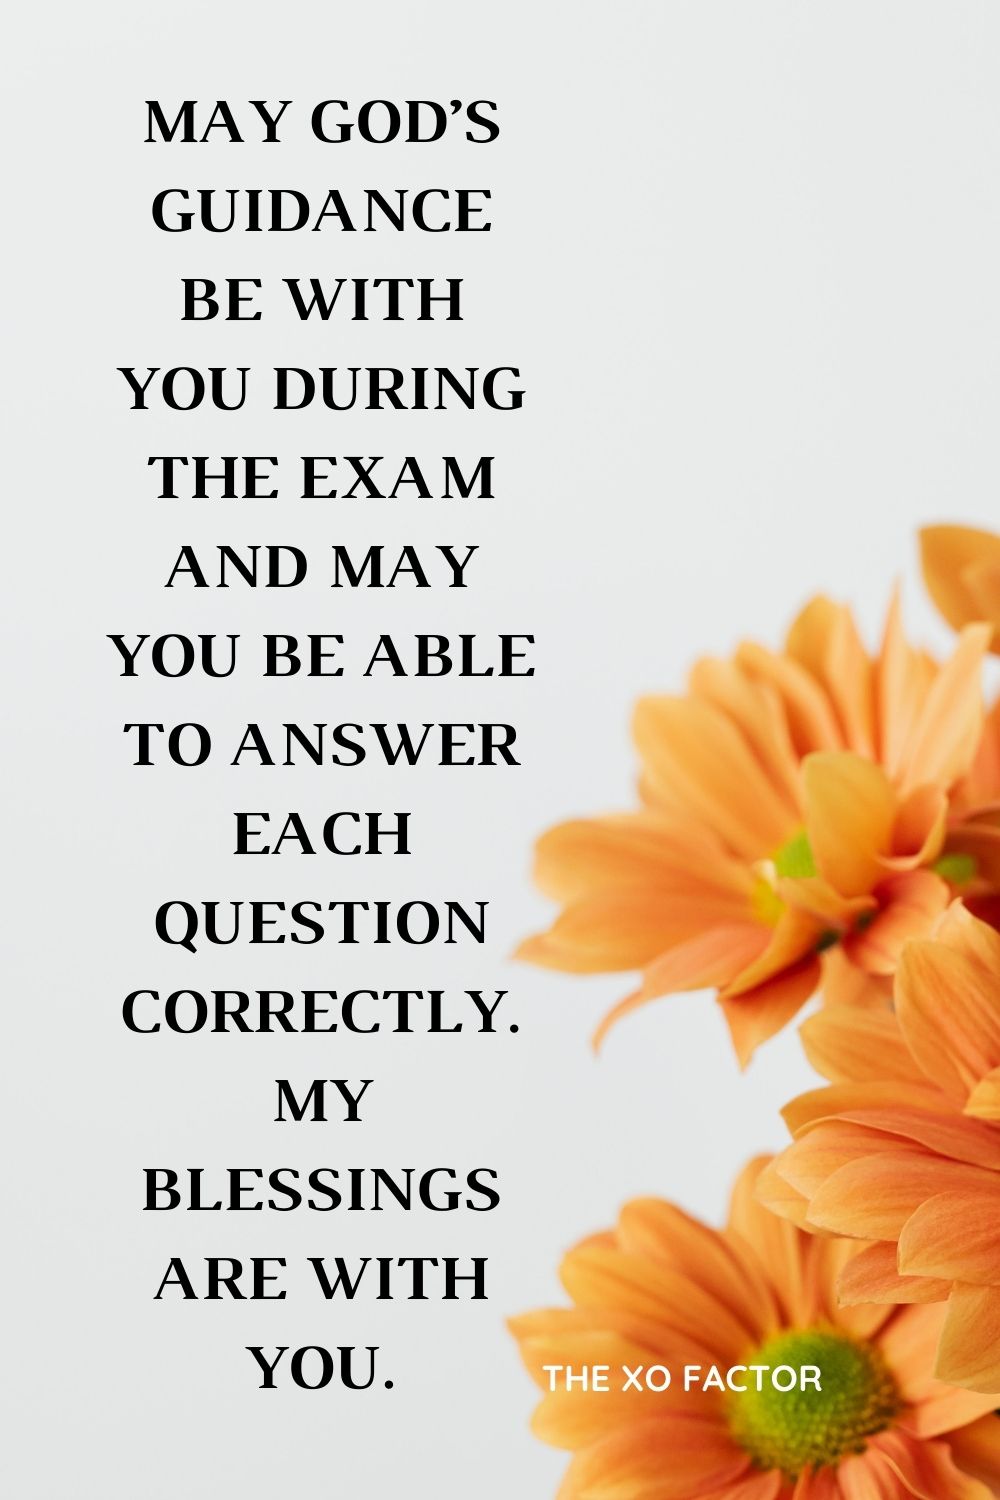 May God’s guidance be with you during the exam and may you be able to answer each question correctly. My blessings are with you.